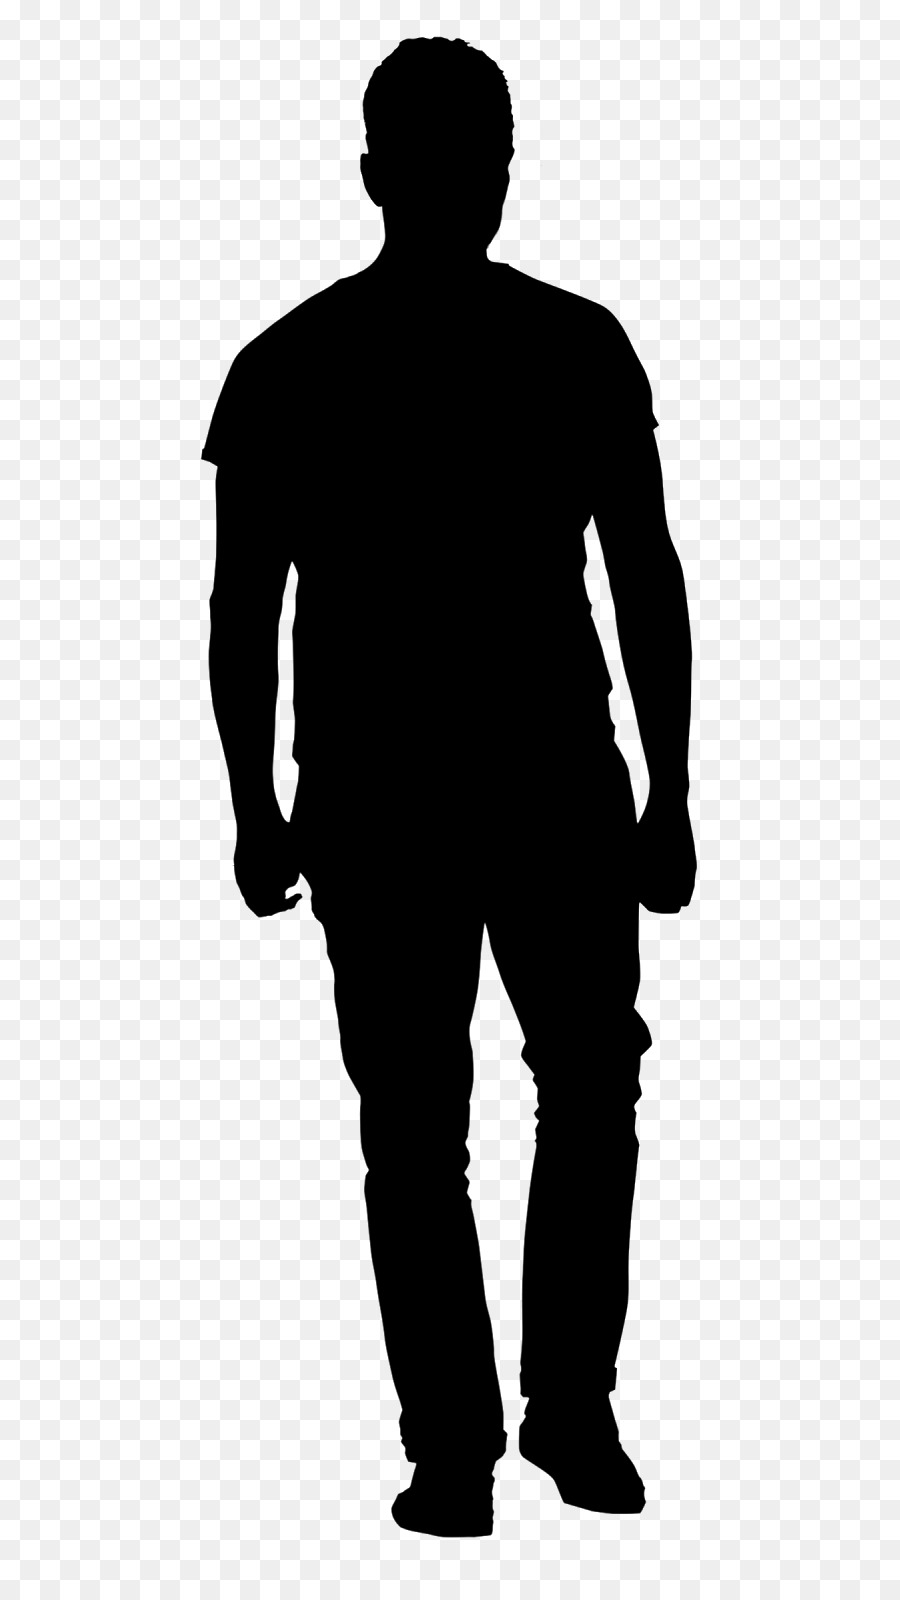 Free The Silhouette Man, Download Free The Silhouette Man png images ...